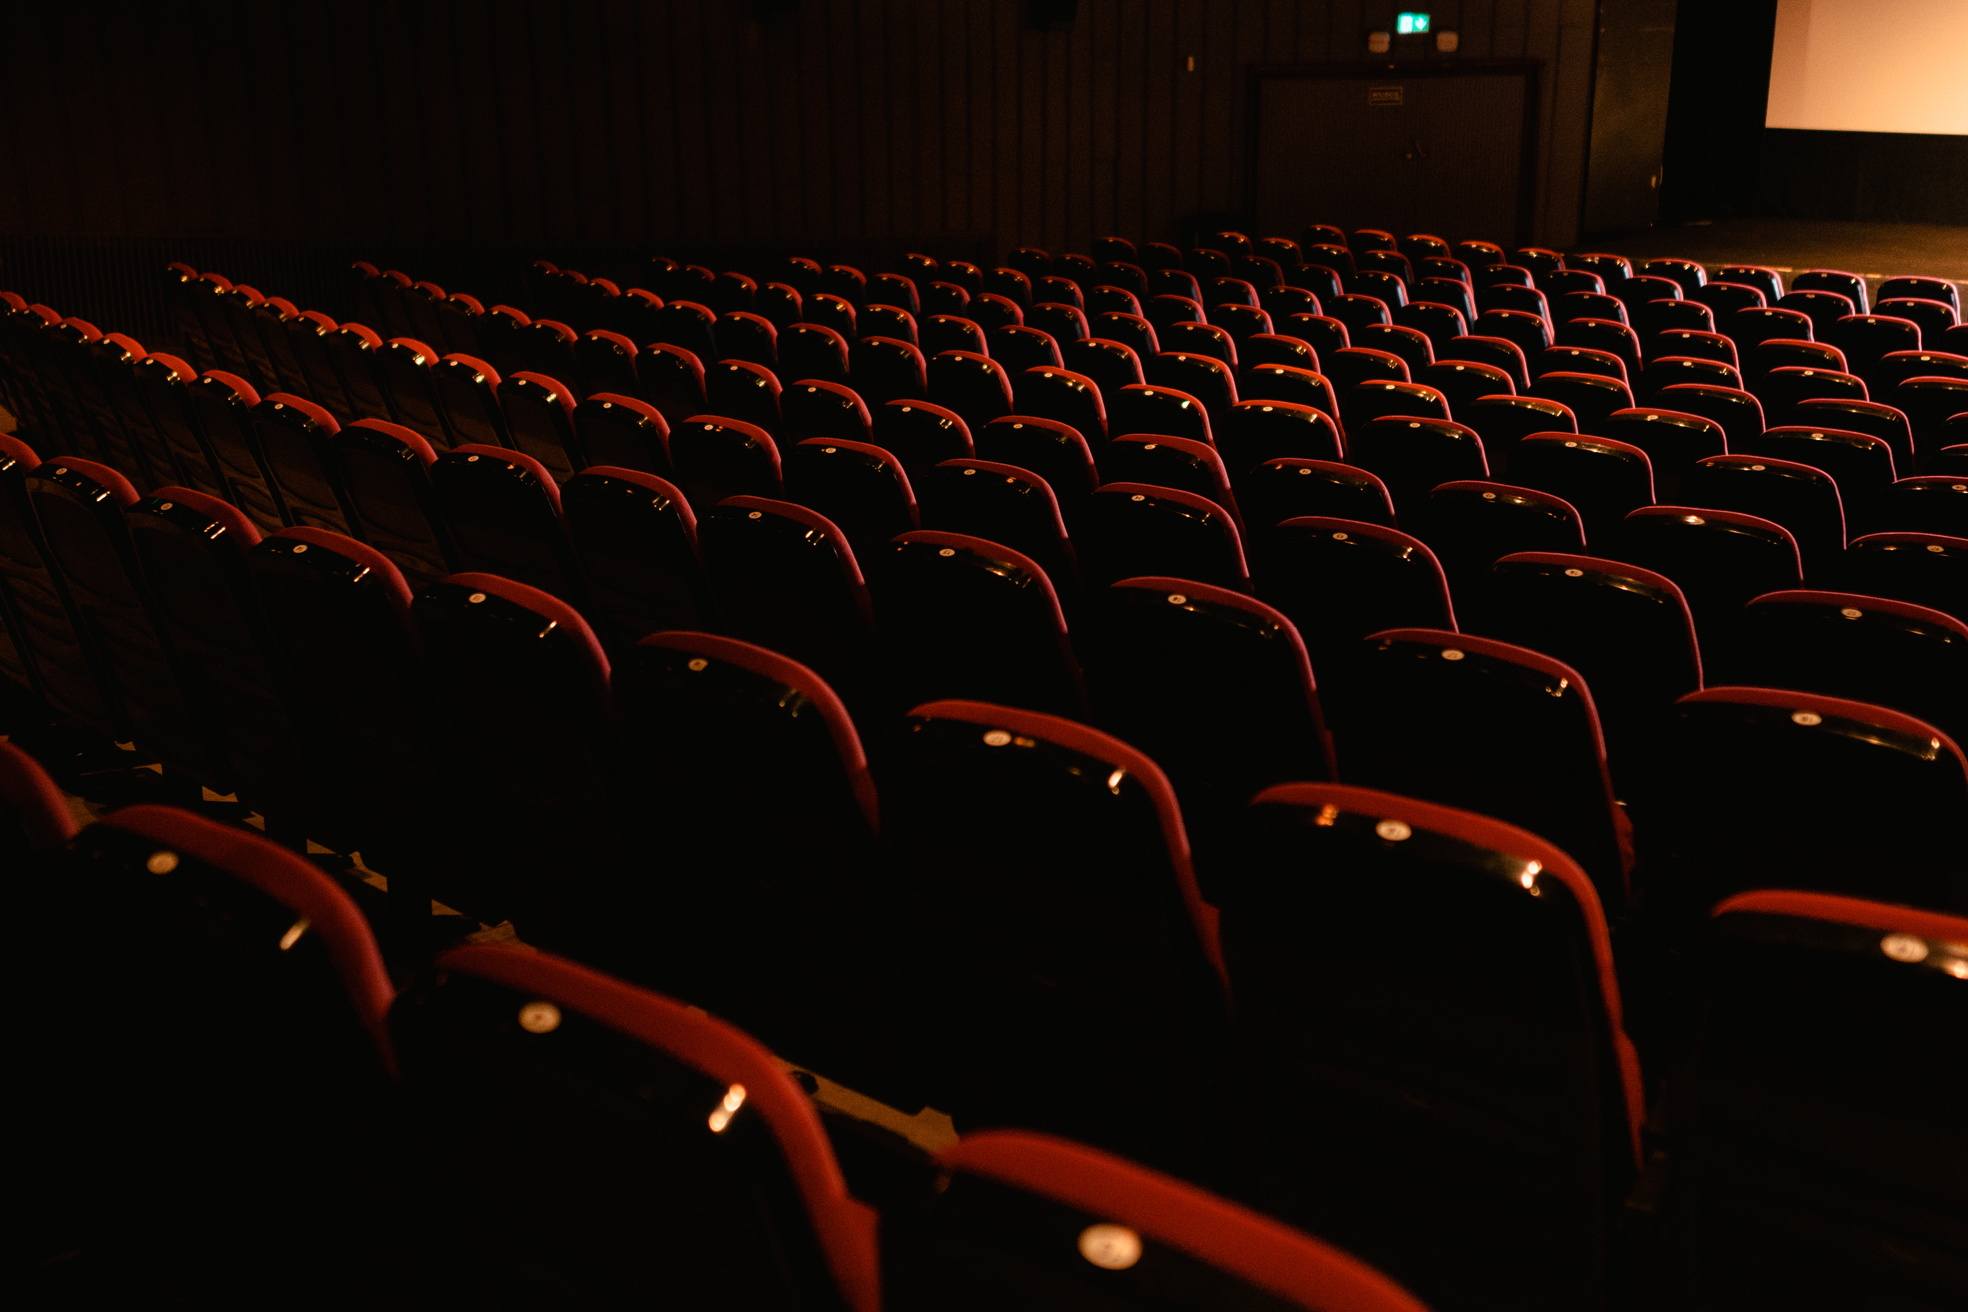 Ann Array of Red Chairs in a Movie Theater